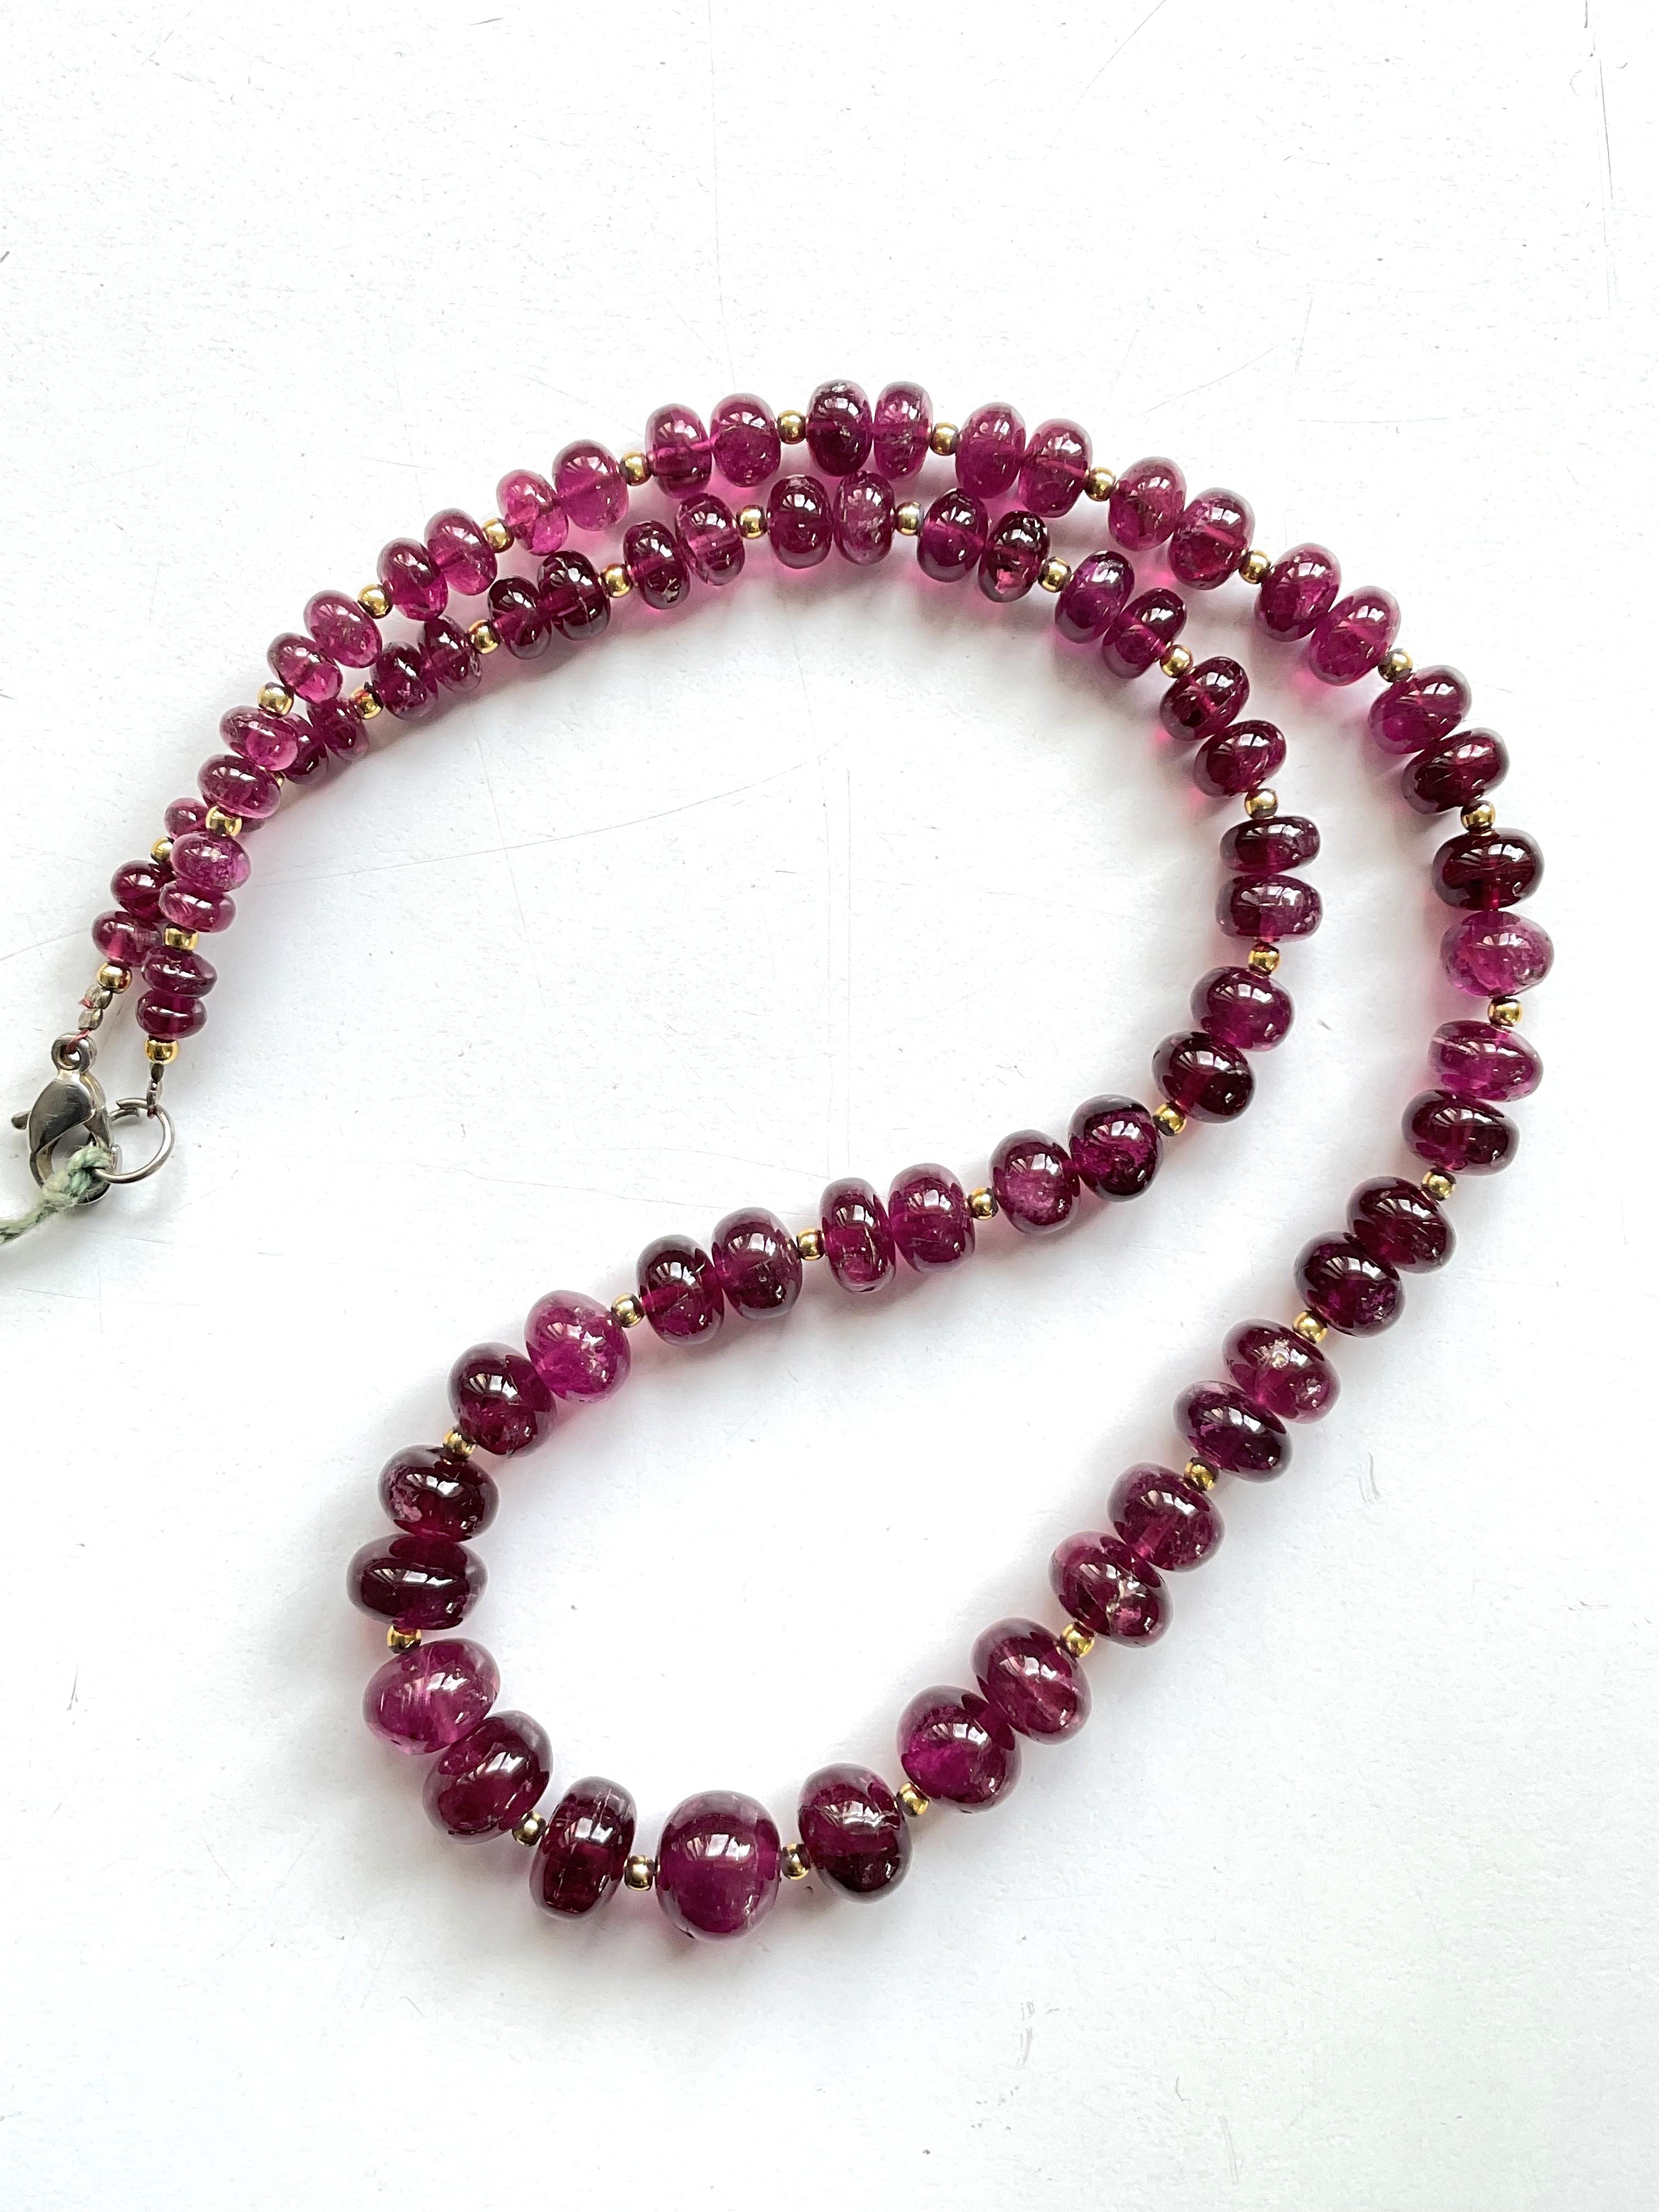 163.00 Carats Rubellite Tourmaline Plain Beads For Top Fine Jewelry Natural Gem For Sale 3